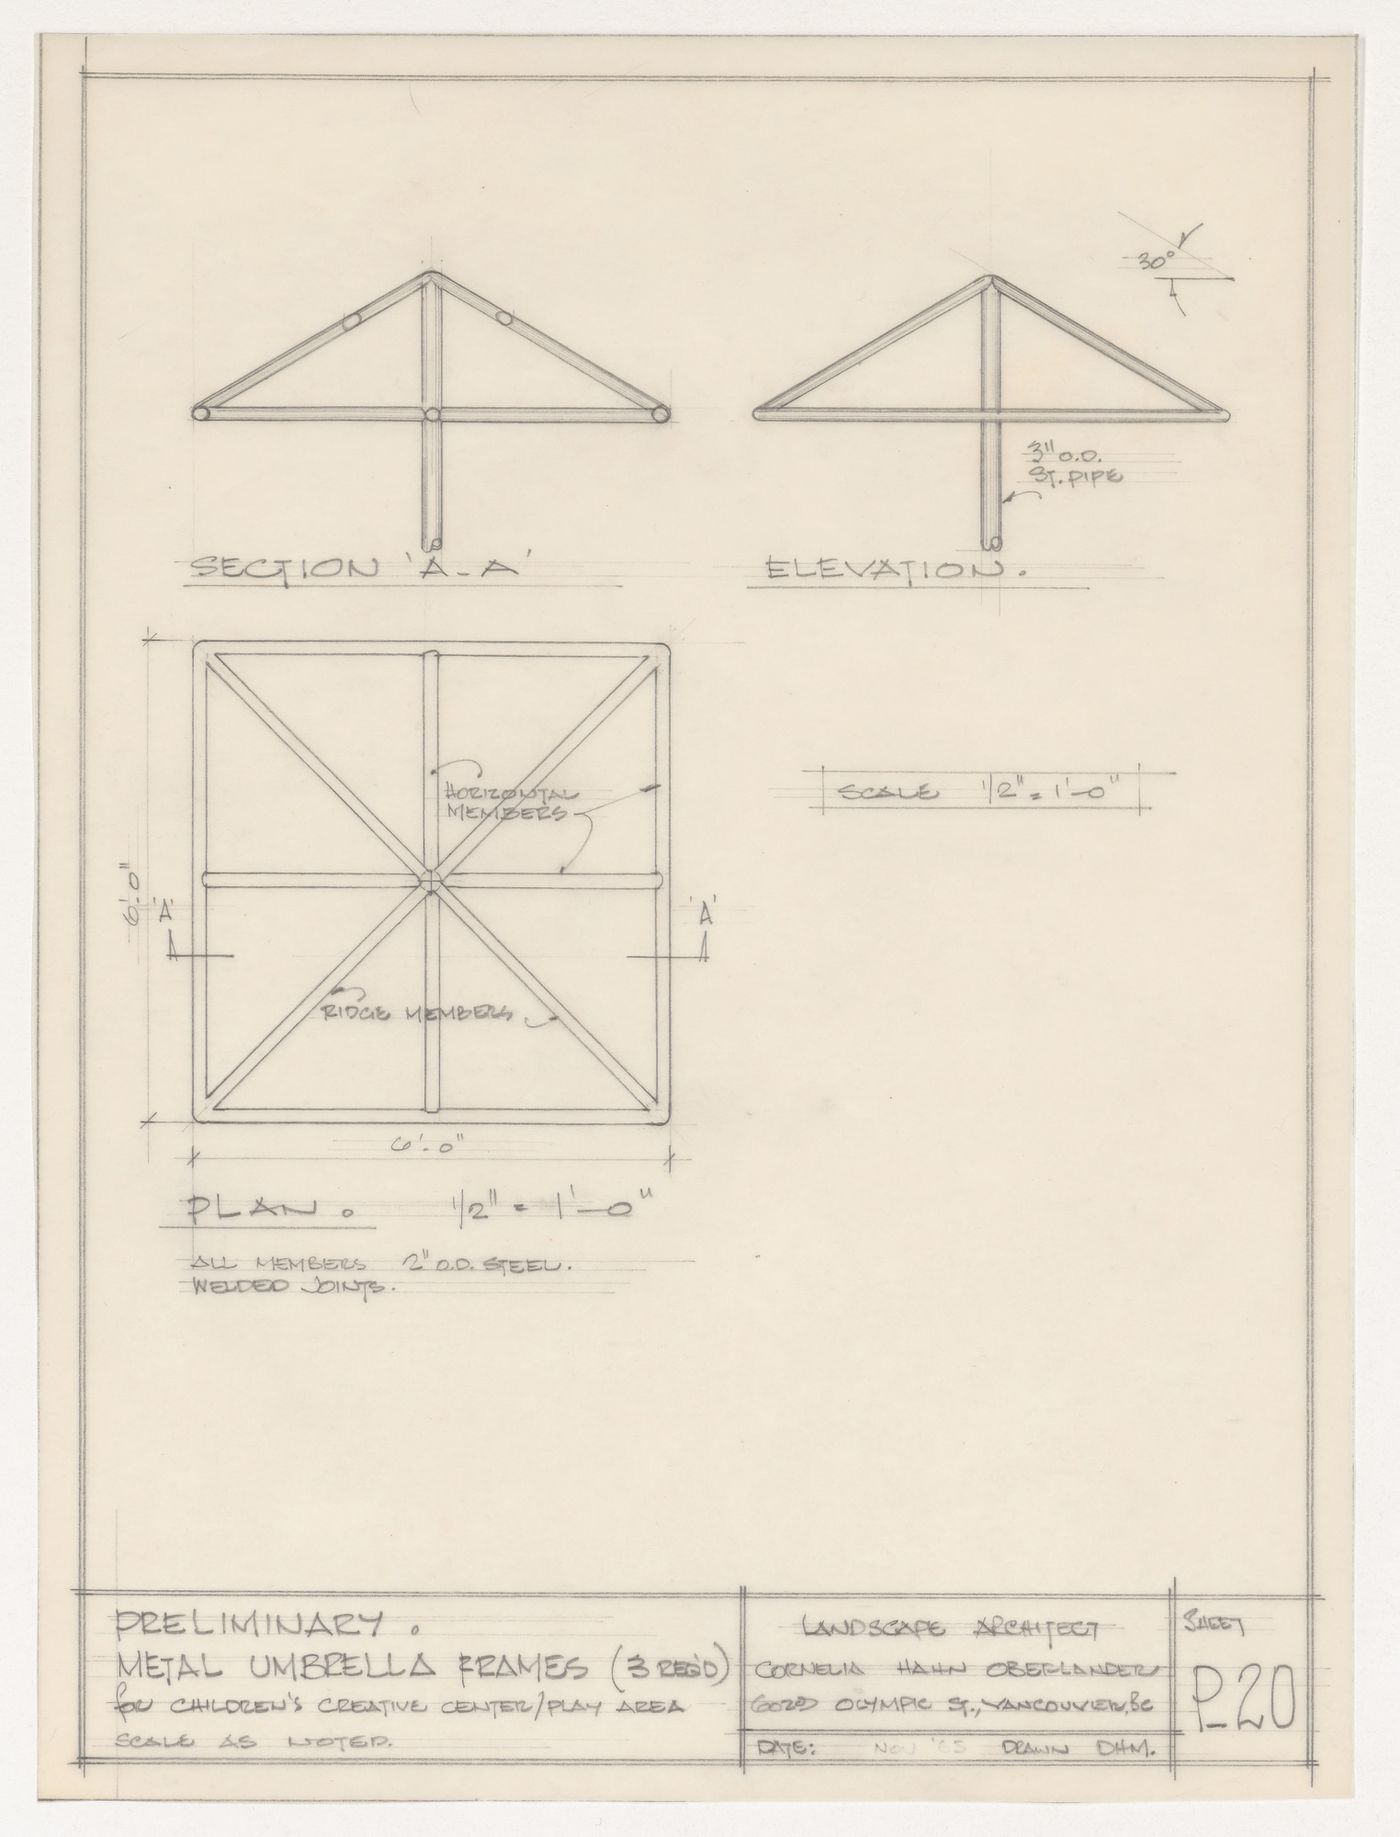 Preliminary section, elevation, and plan for metal umbrella frames for Children's Creative Centre Playground, Canadian Federal Pavilion, Expo '67, Montréal, Québec